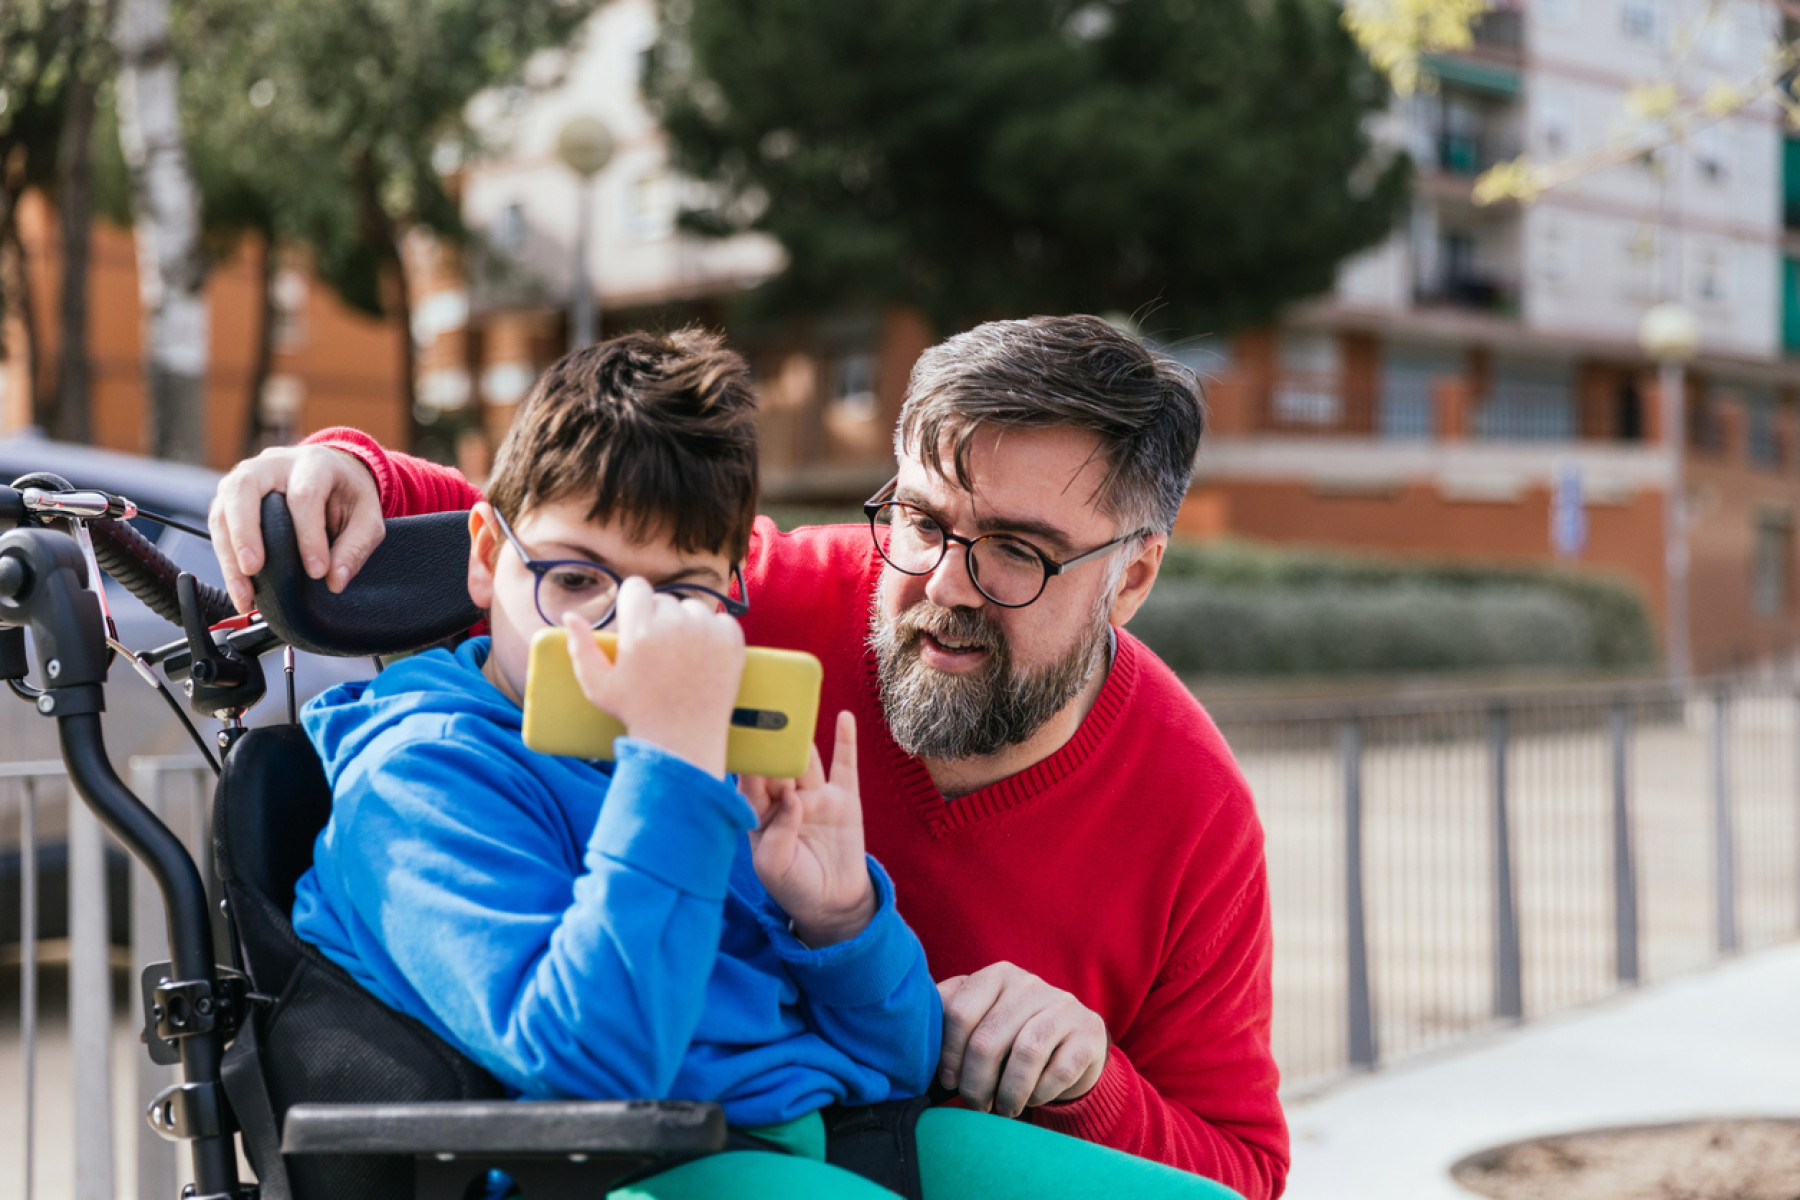 A young boy in glasses seated in a wheelchair using iPhone's Assistive Access, with his father in a red sweater beside him in an outdoor setting.